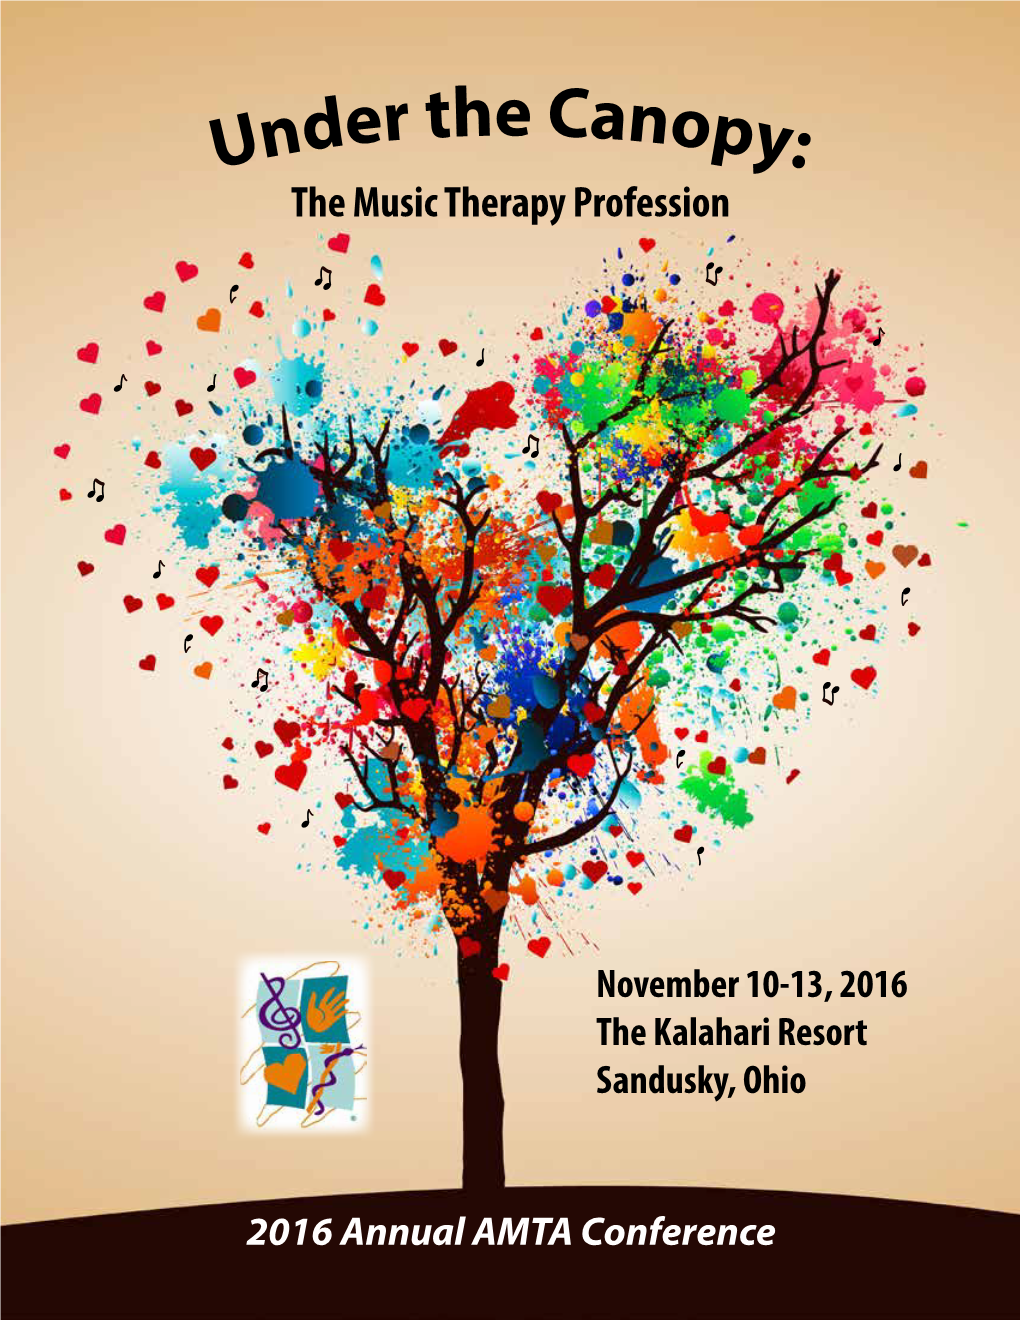 Under the Canopy: the Music Therapy Profession